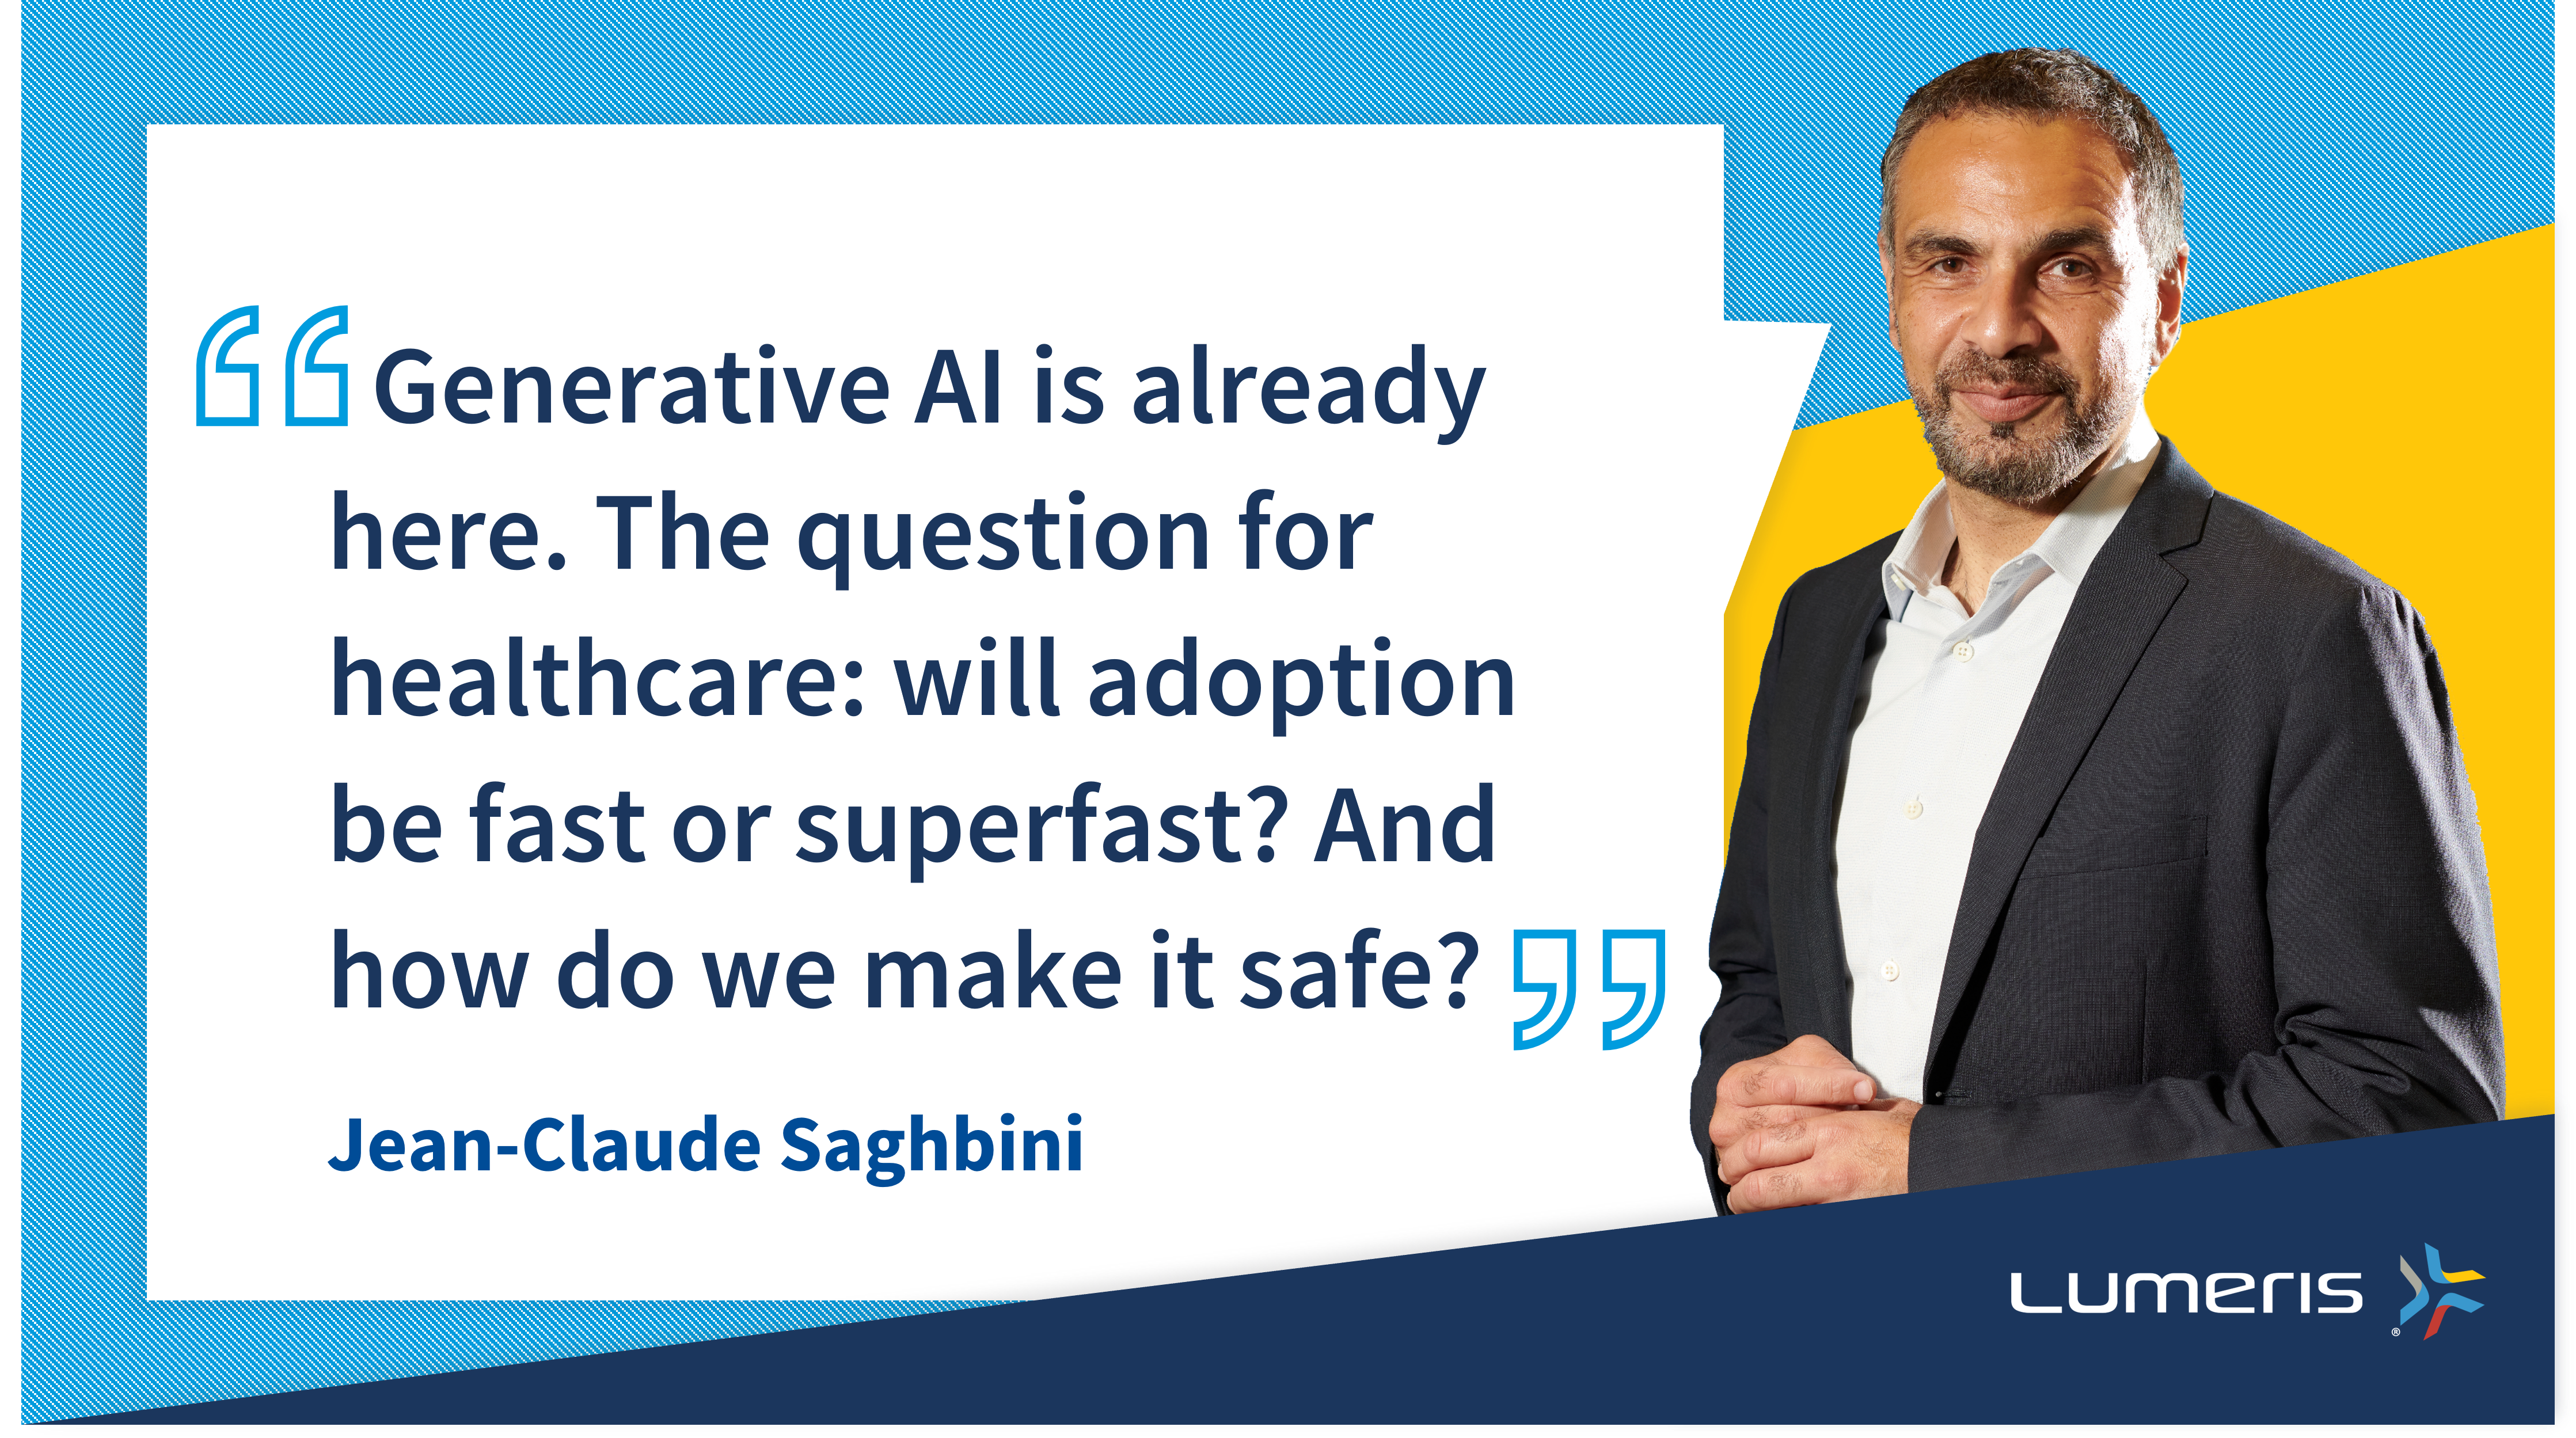 Image is a quote, "Generative AI is already here. The question for healthcare: will adoption be fast or superfast? And how do we make it safe?"